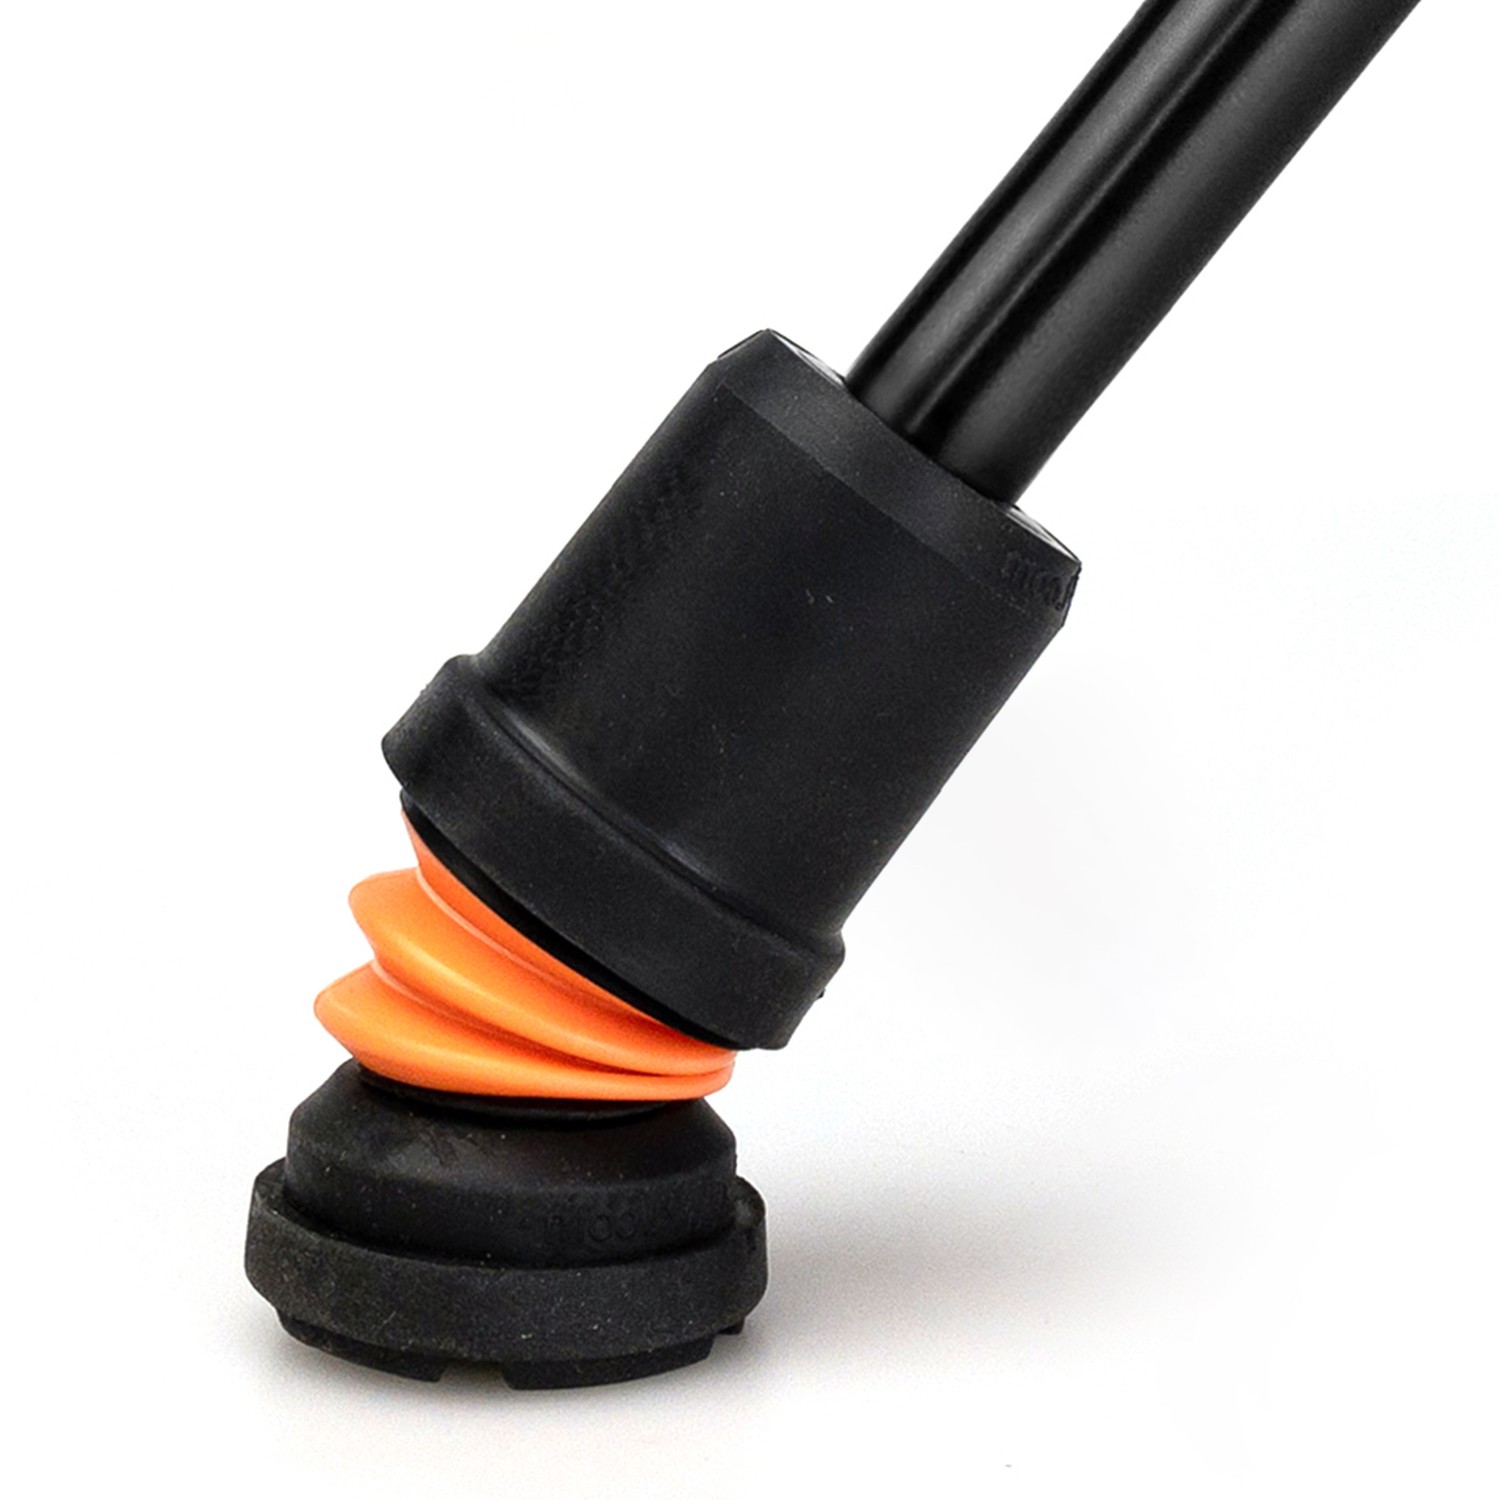 The Flexyfoot Ferrule Bends for Shock Absorption